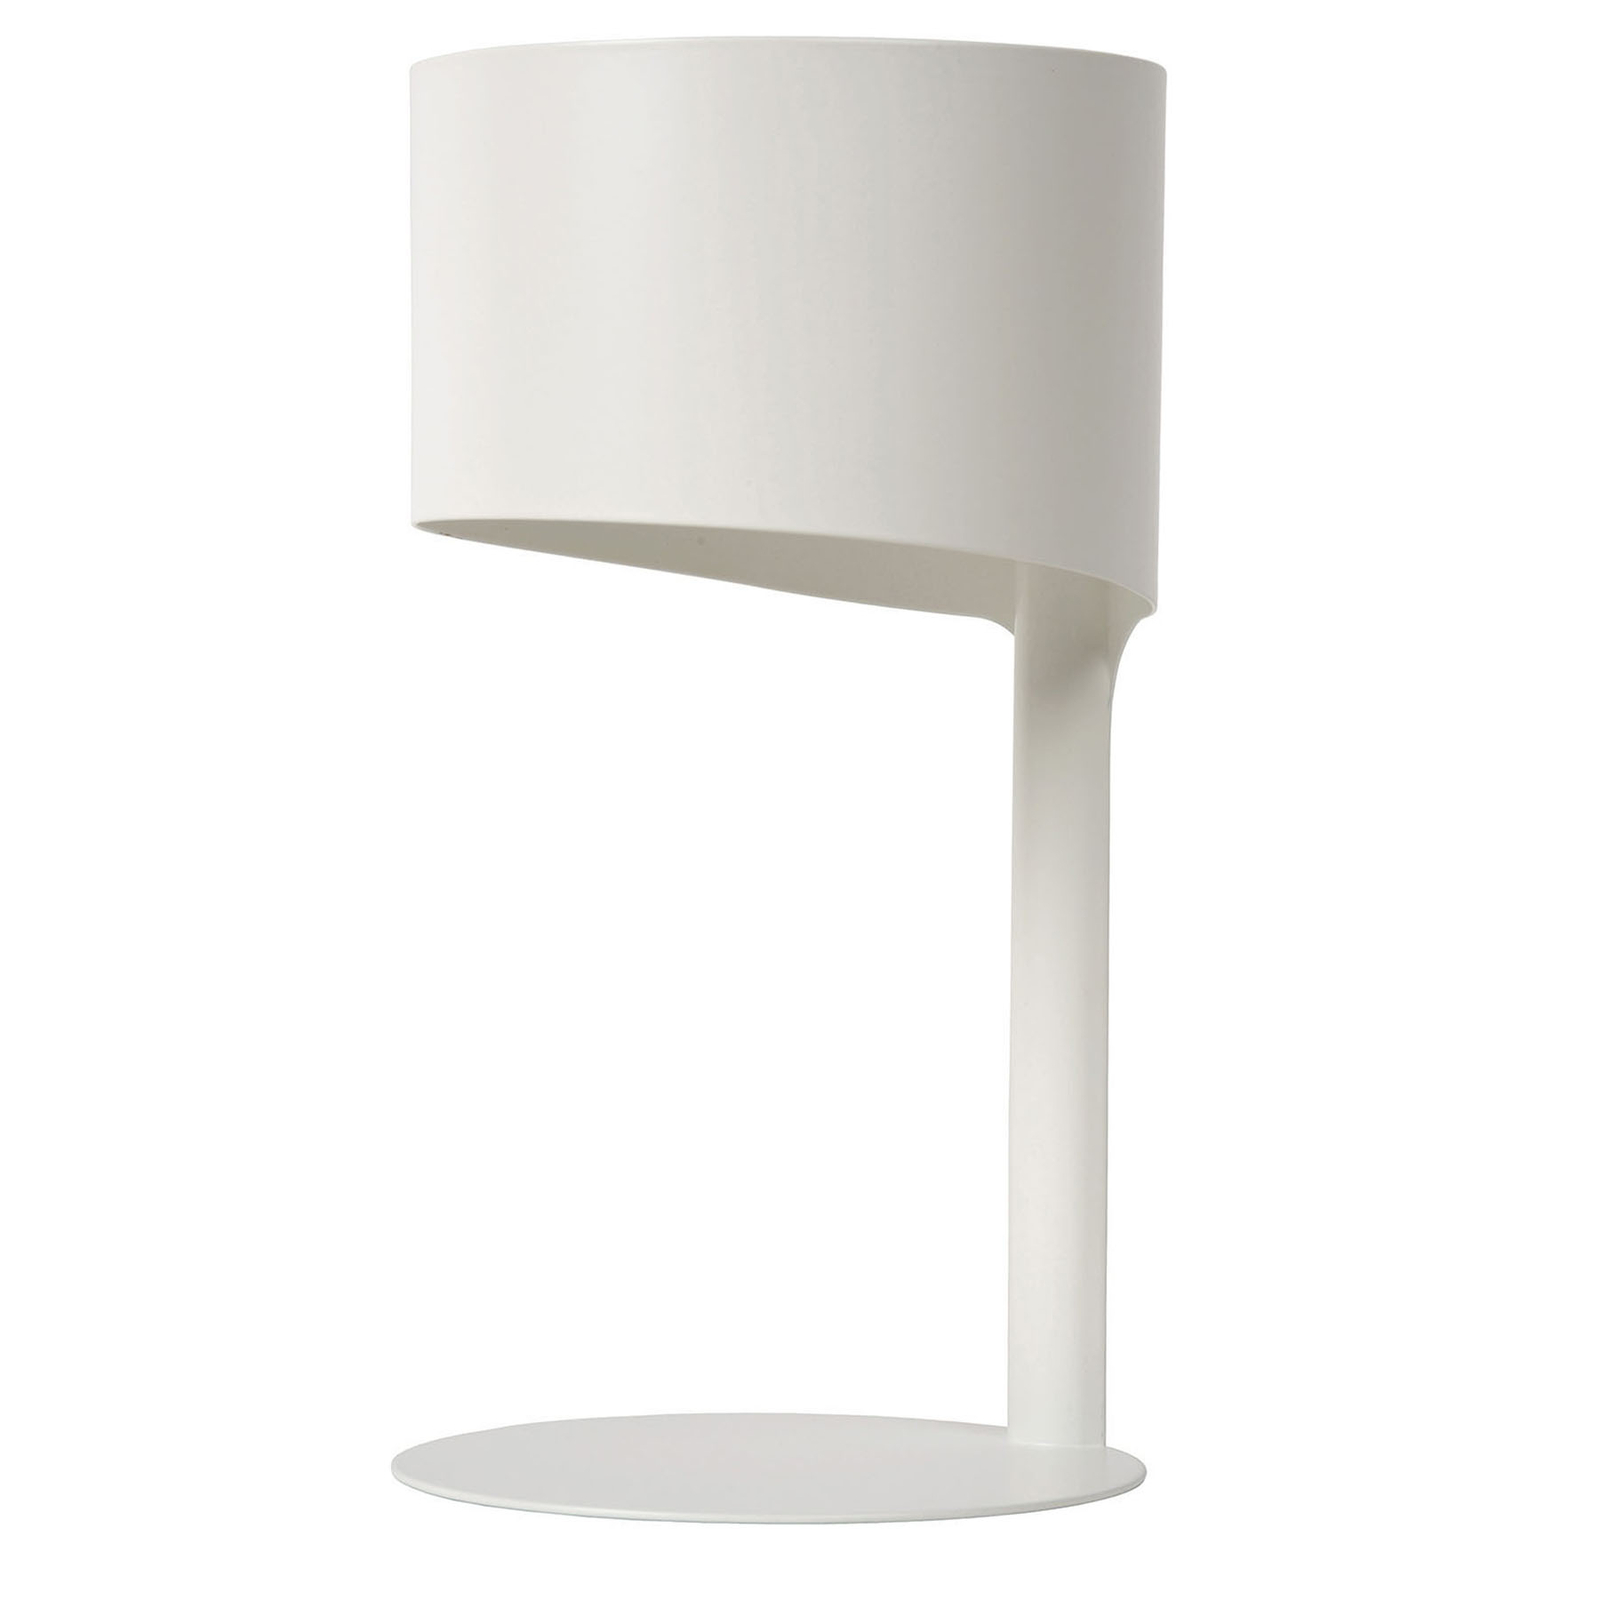 Knulle table lamp made of metal, white